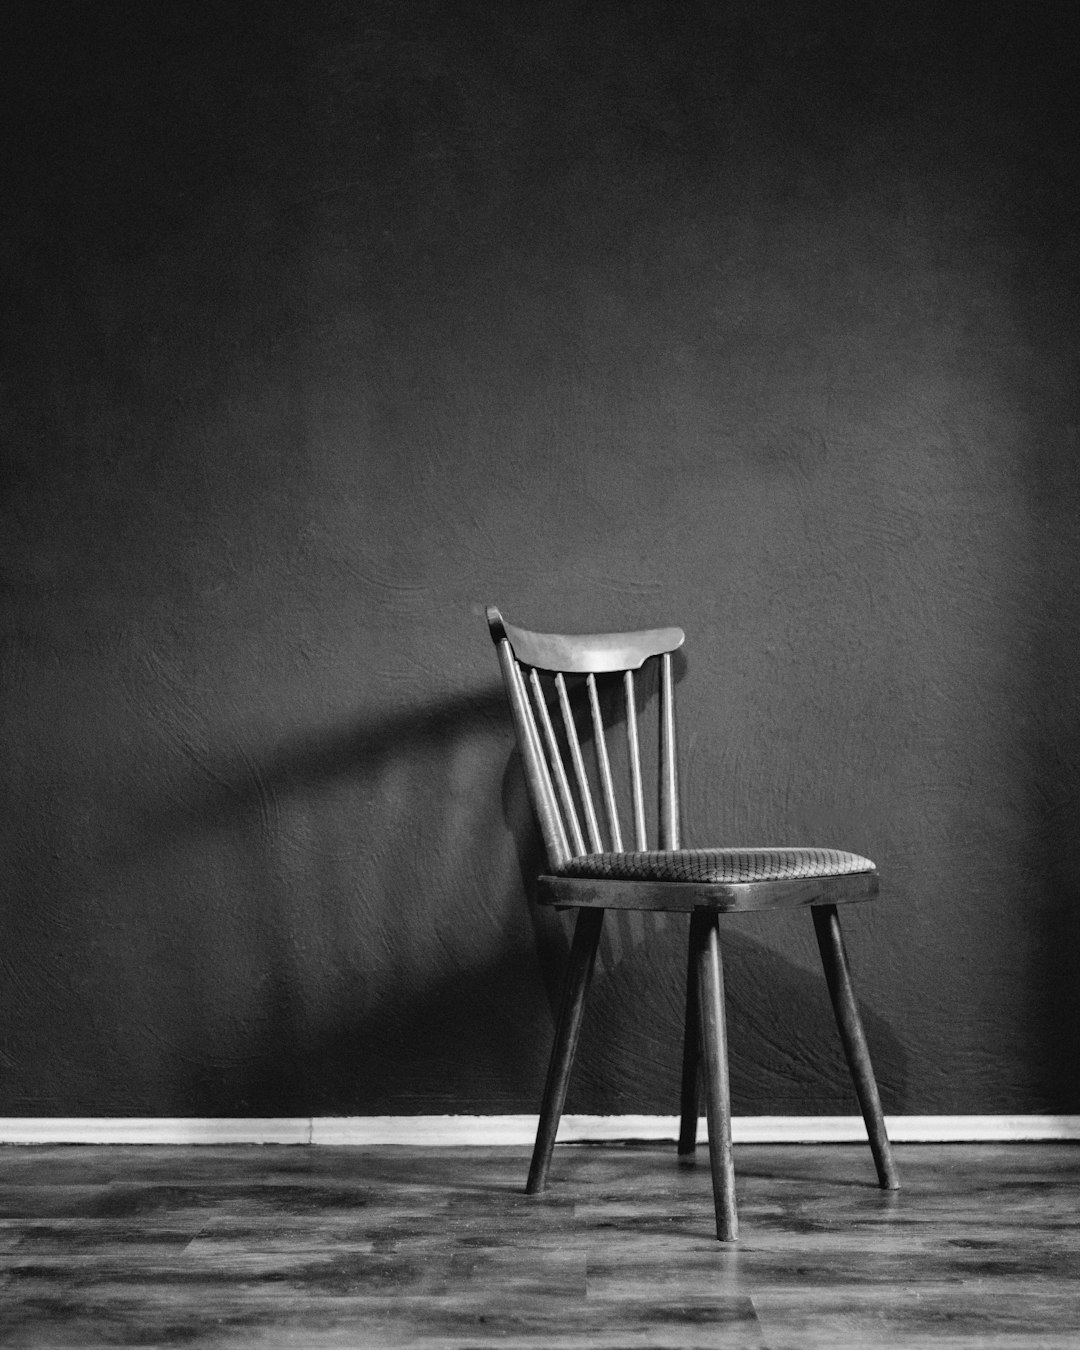  grayscale photo of wooden chair chair